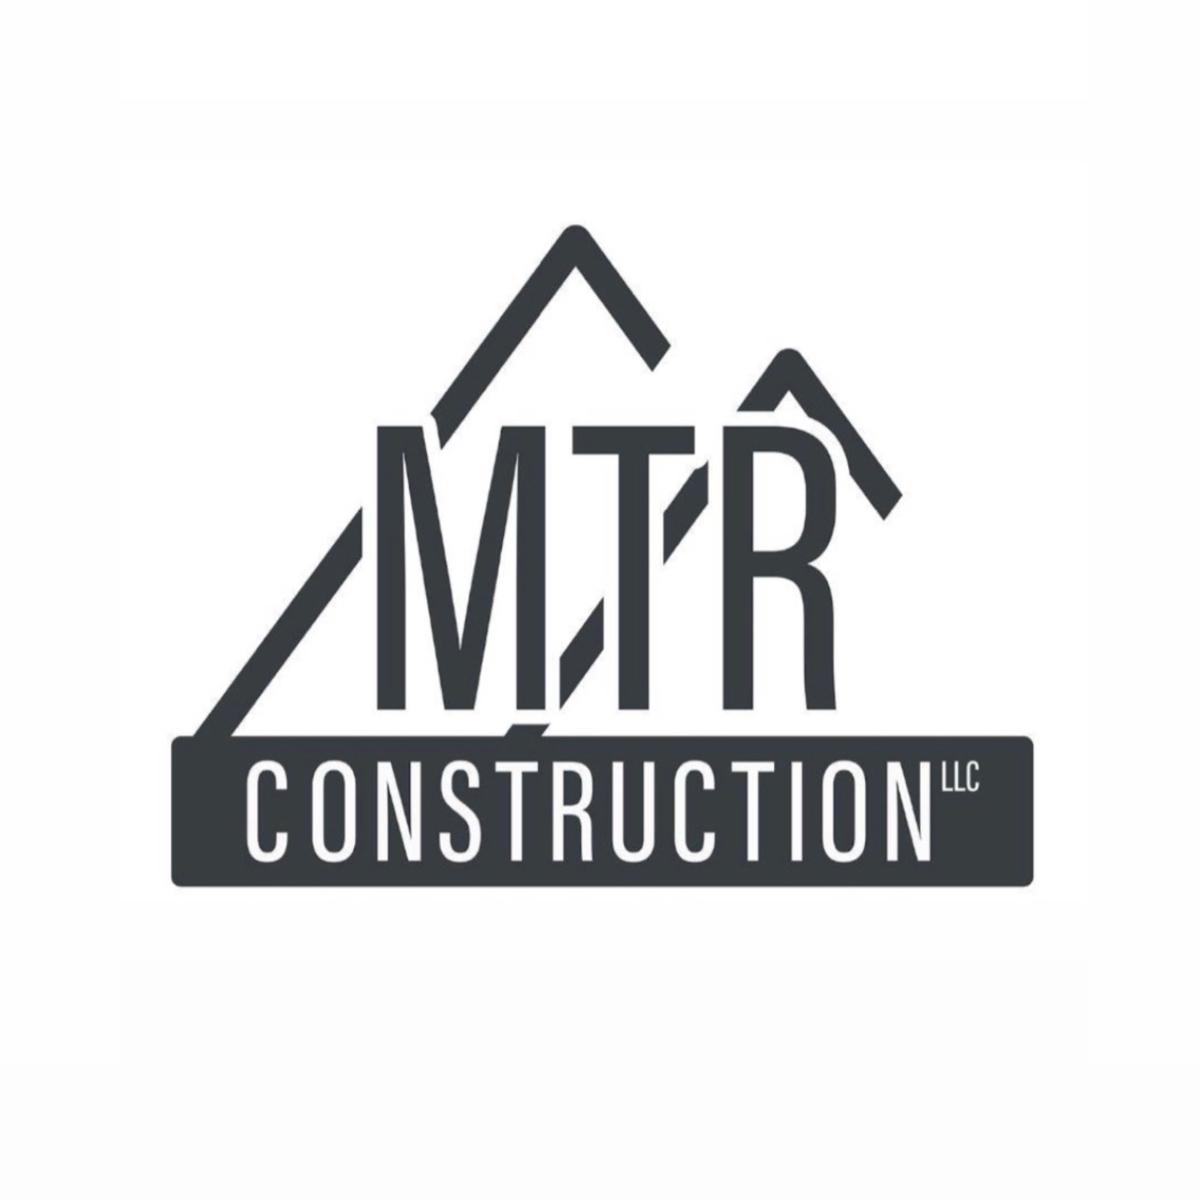 MTRConstruction's images